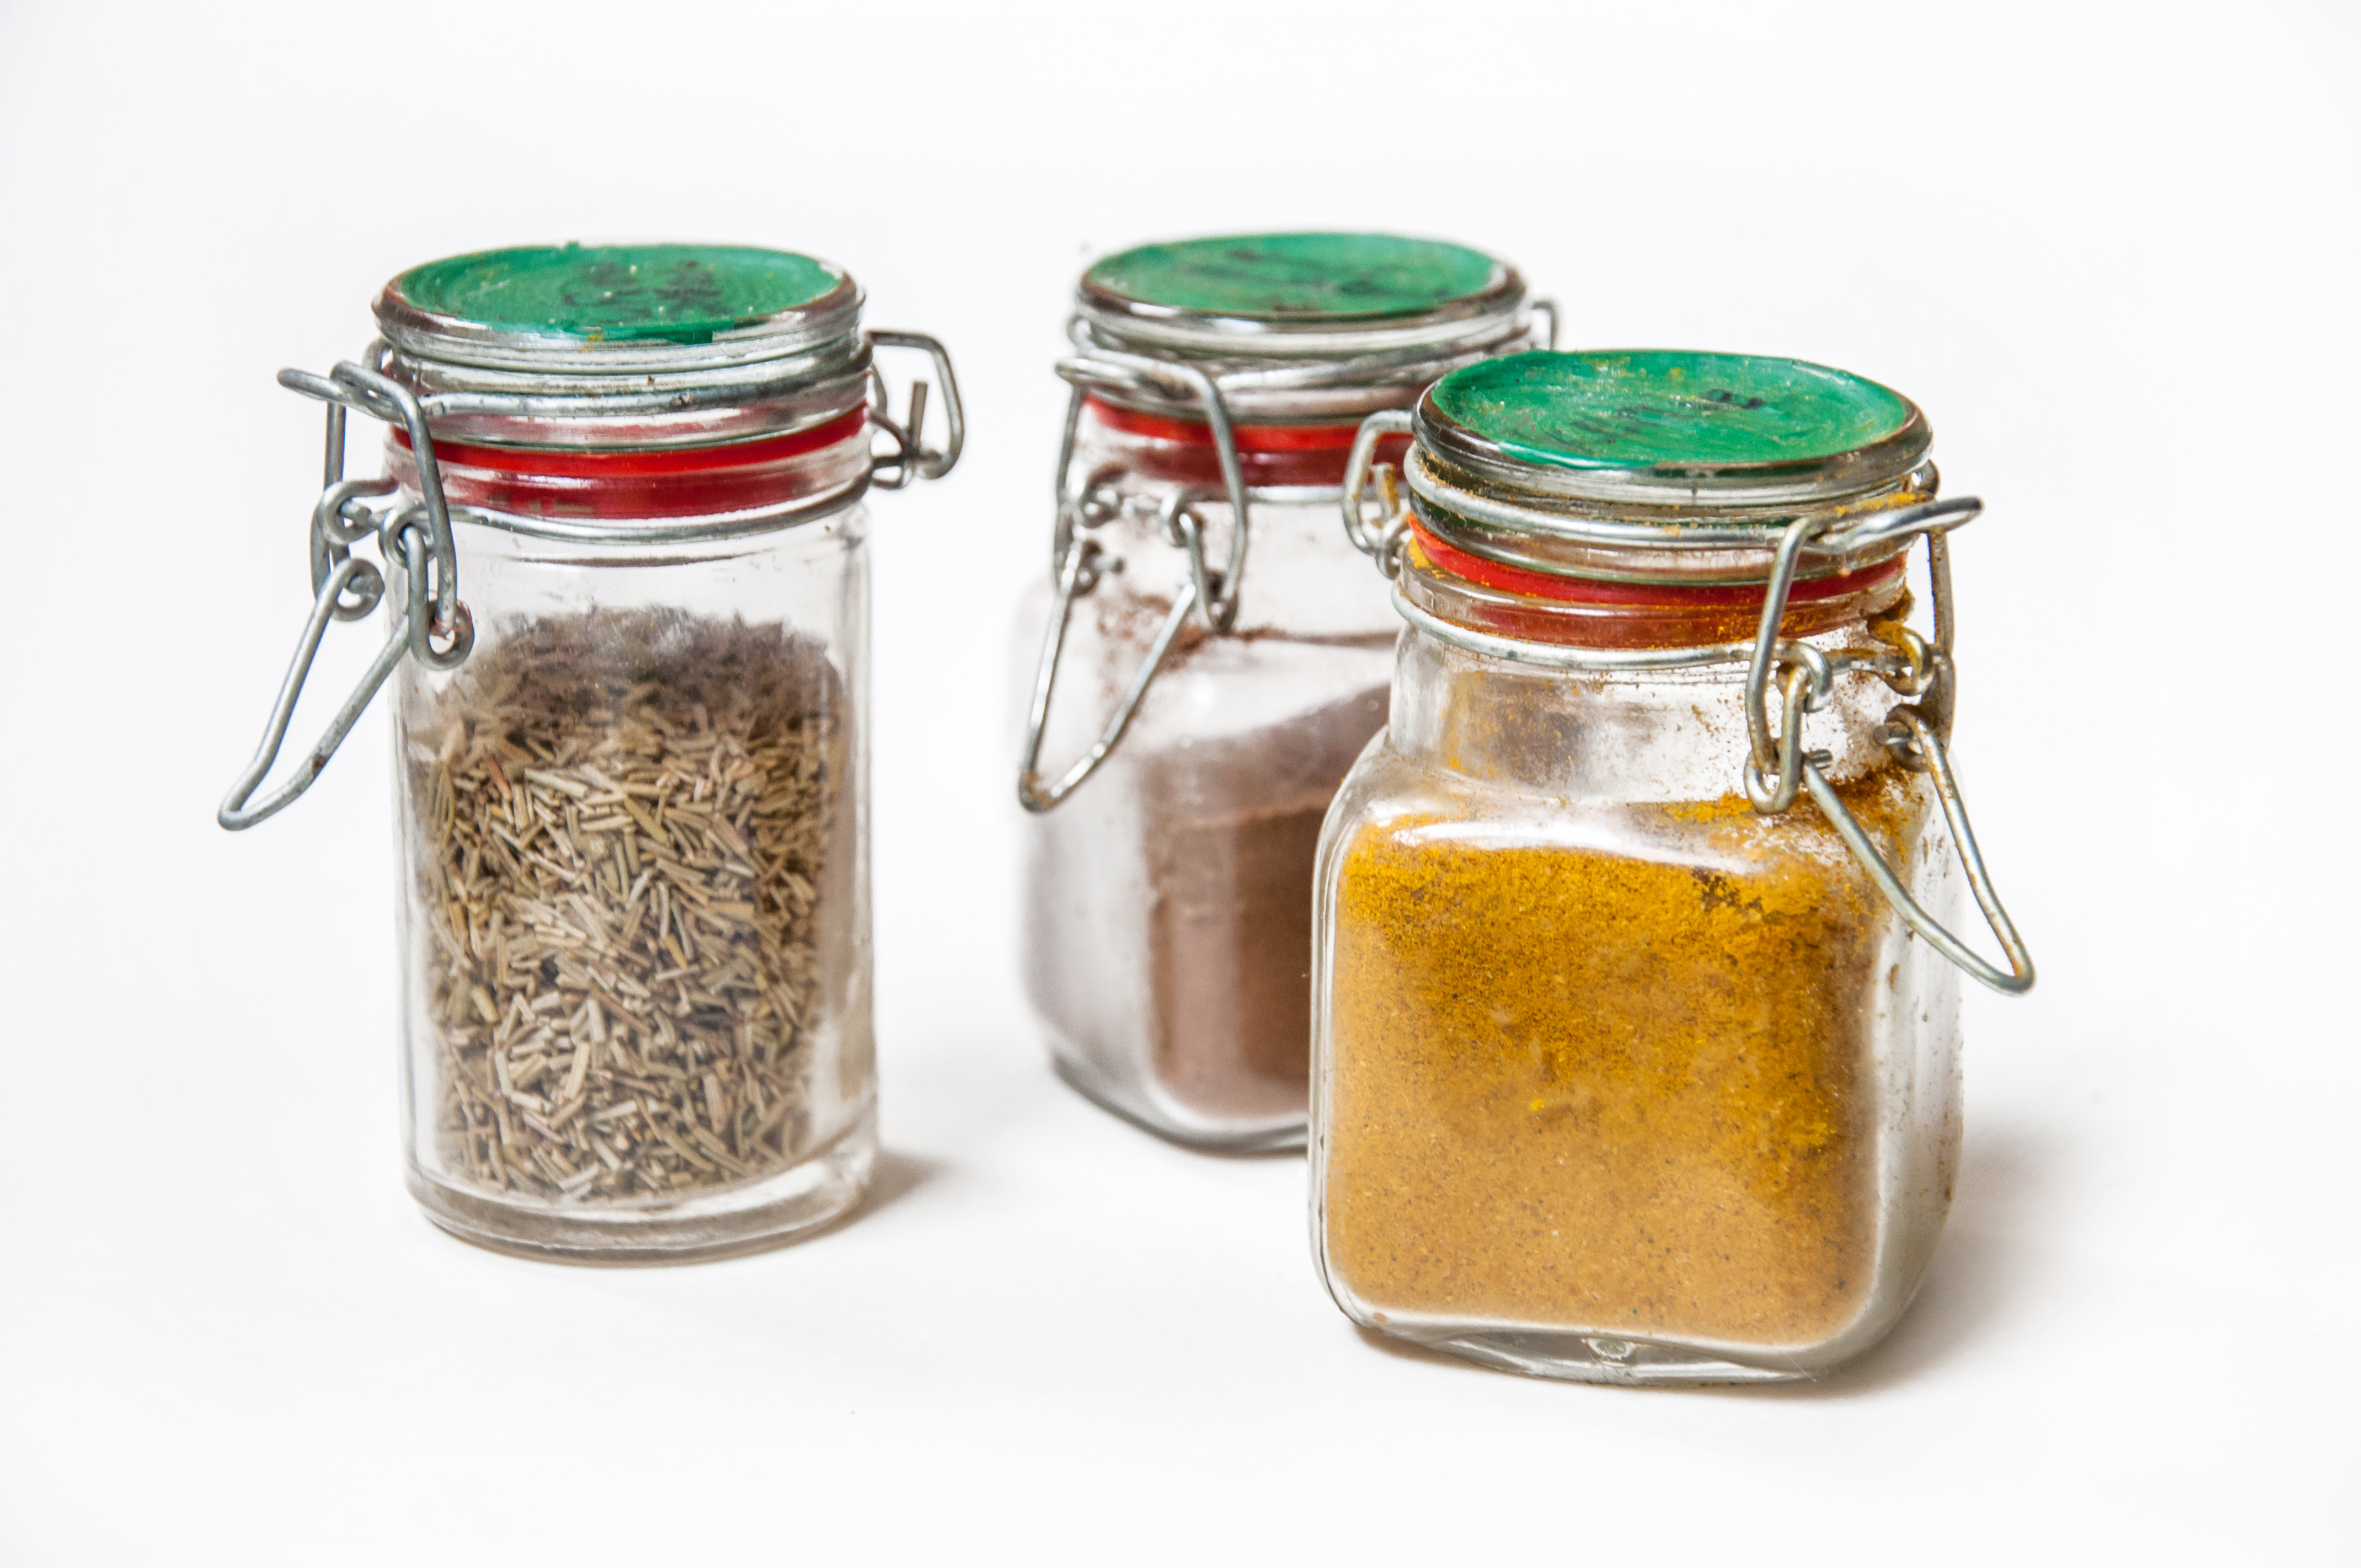 Spices and herbs in jars photo